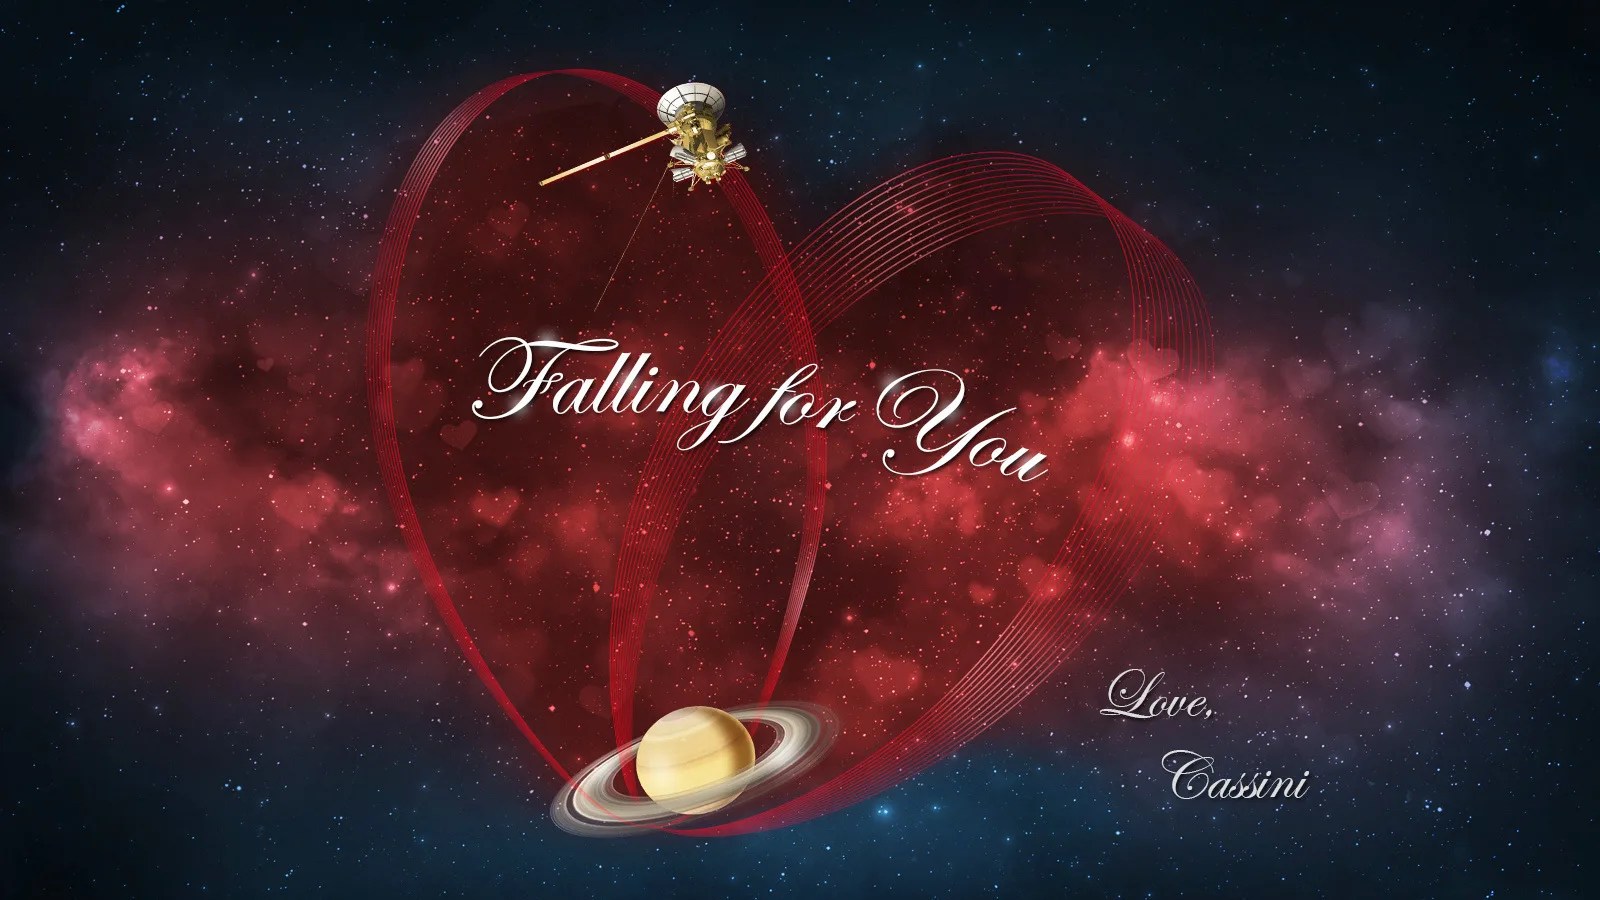 Happy Valentine's Day from Cassini at Saturn.